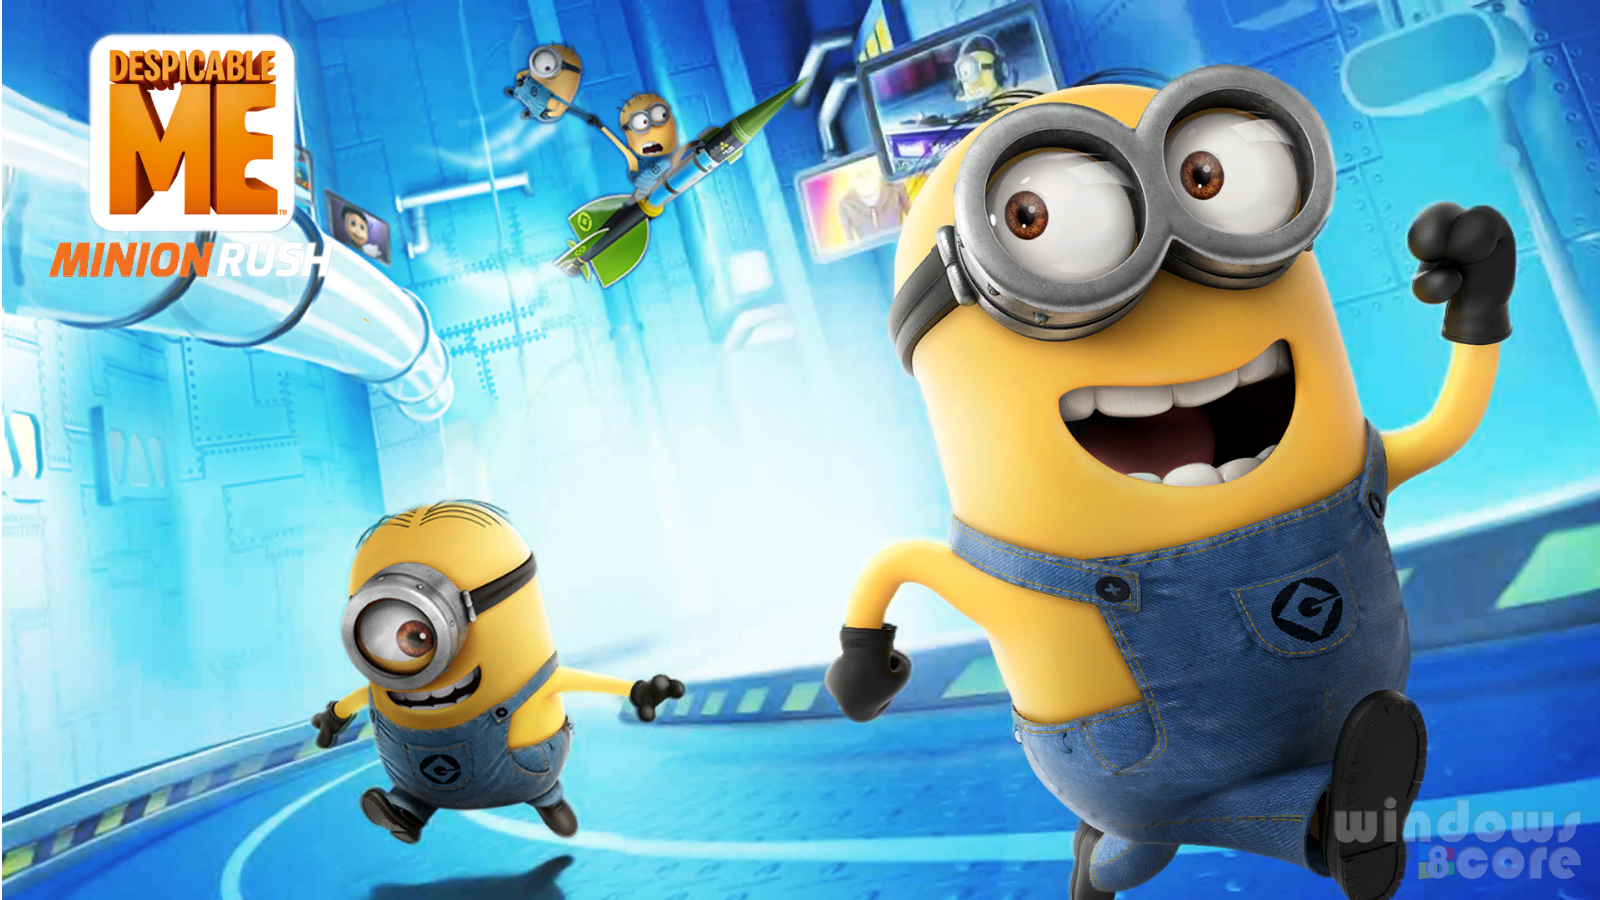 Depicable Me Minion Rush For Windows Png